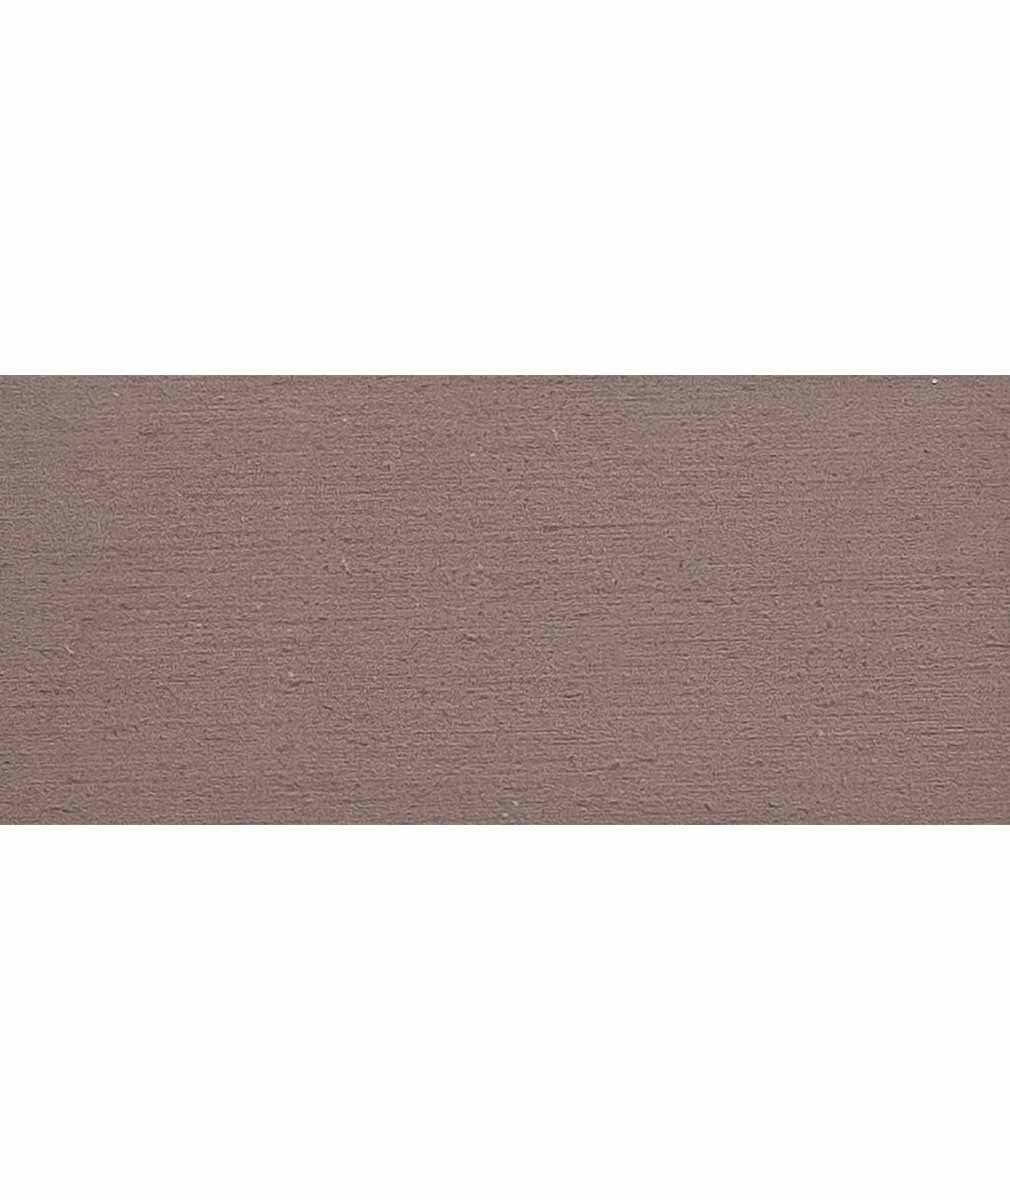 Shop Benjamin Moore&#39;s Briarwood Arborcoat Semi-Solid Stain  from JC Licht